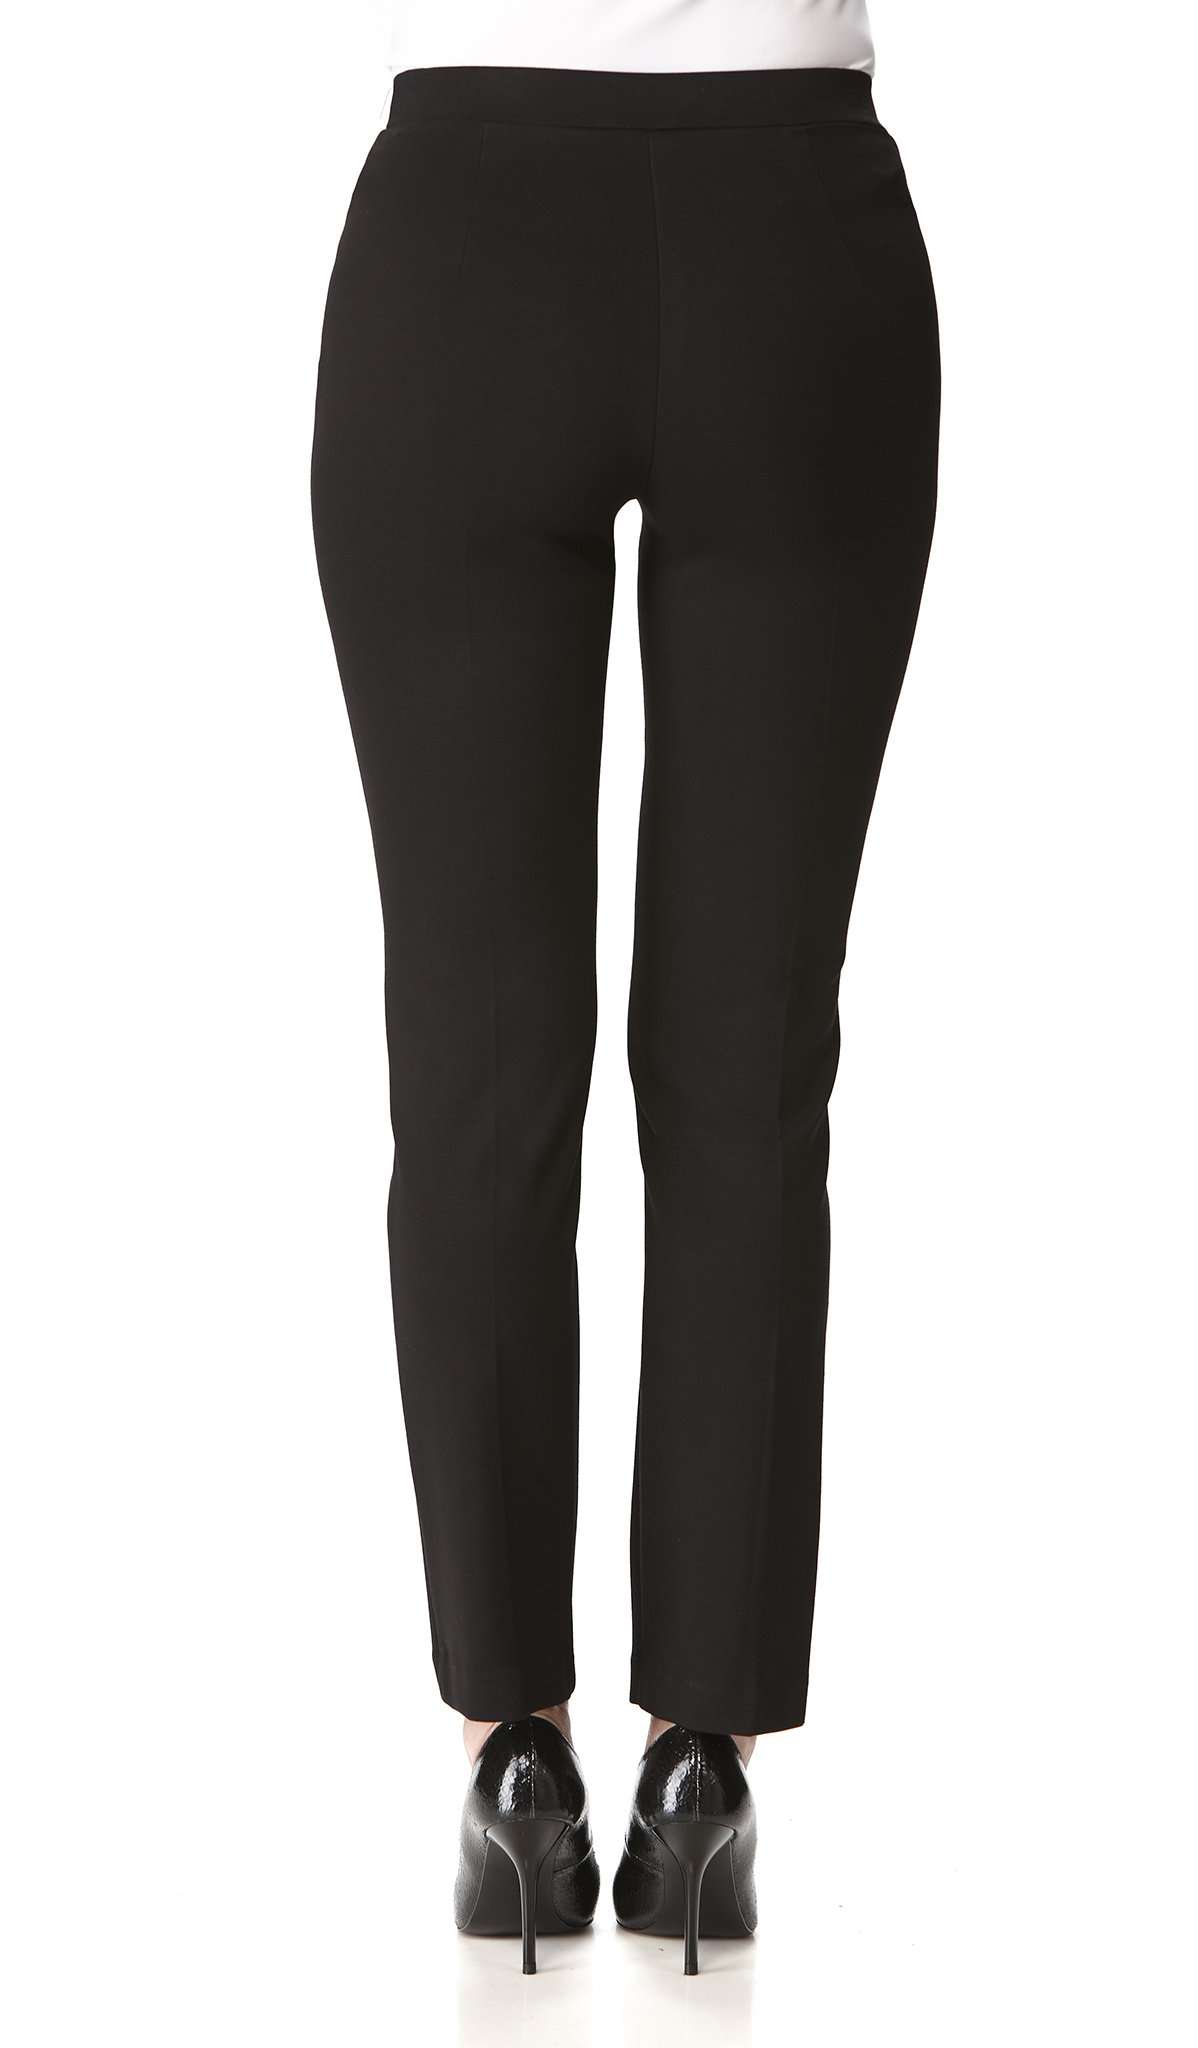 Women's Pants Black Quality Stretch Fabric Built for Comfort Our Best Selling Pant Made in Canada - Yvonne Marie - Yvonne Marie